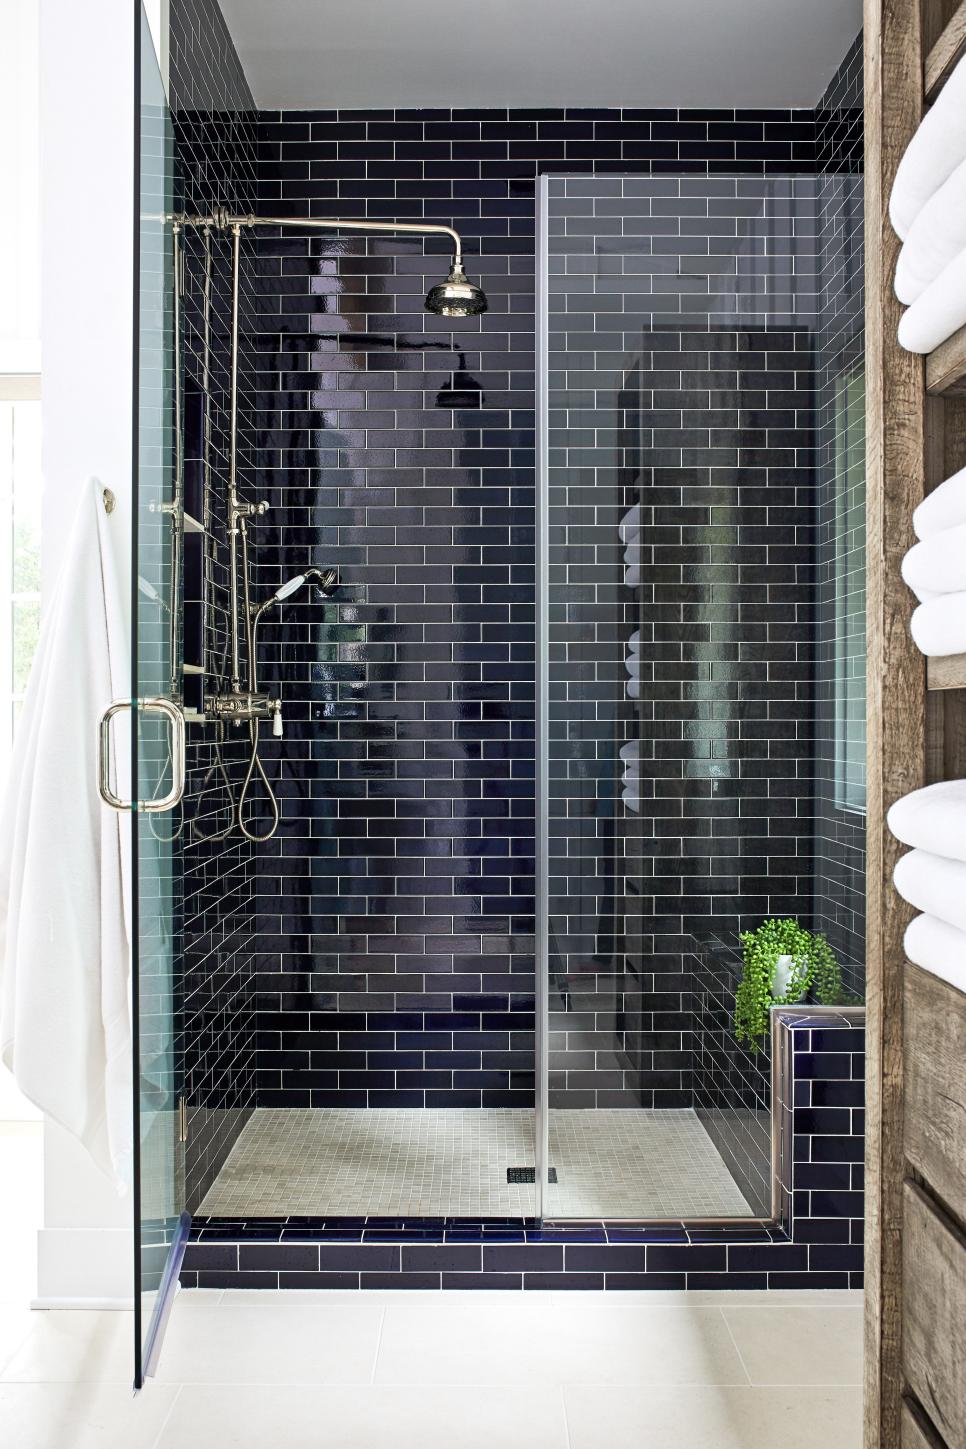 Walk-In Shower Features Black Subway Tile, Chrome Fixtures and a Built ...